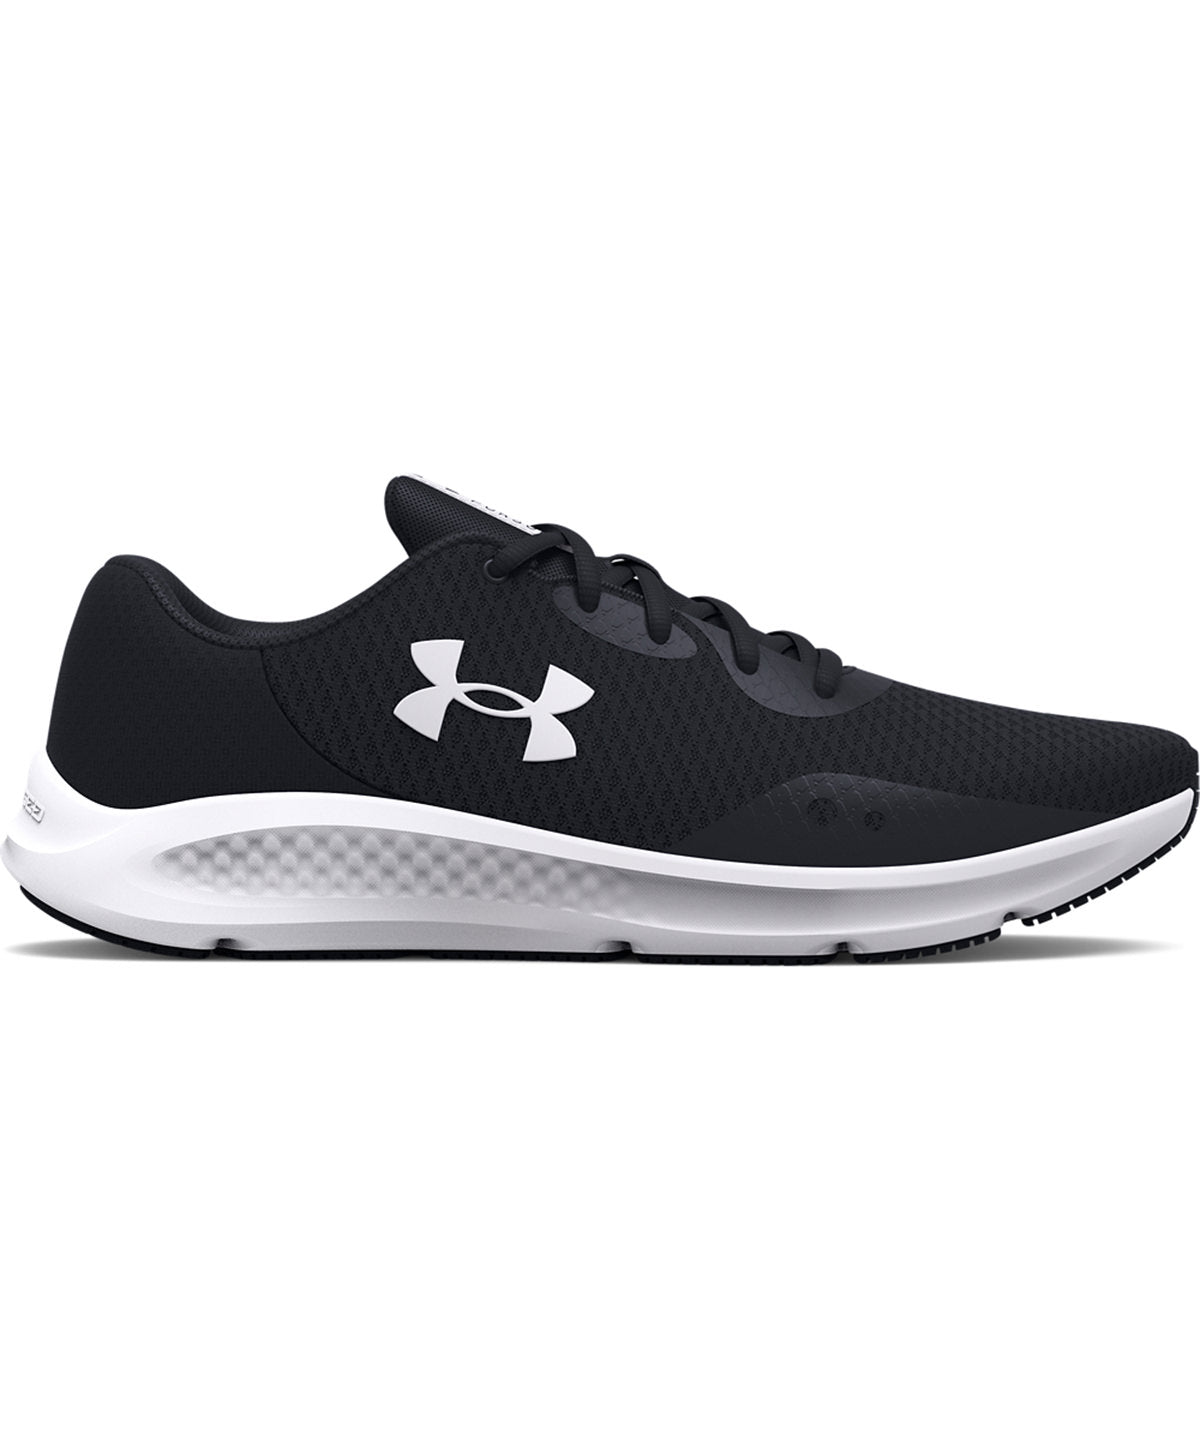 Under Armour Women's Charged Pursuit 3 Trainers